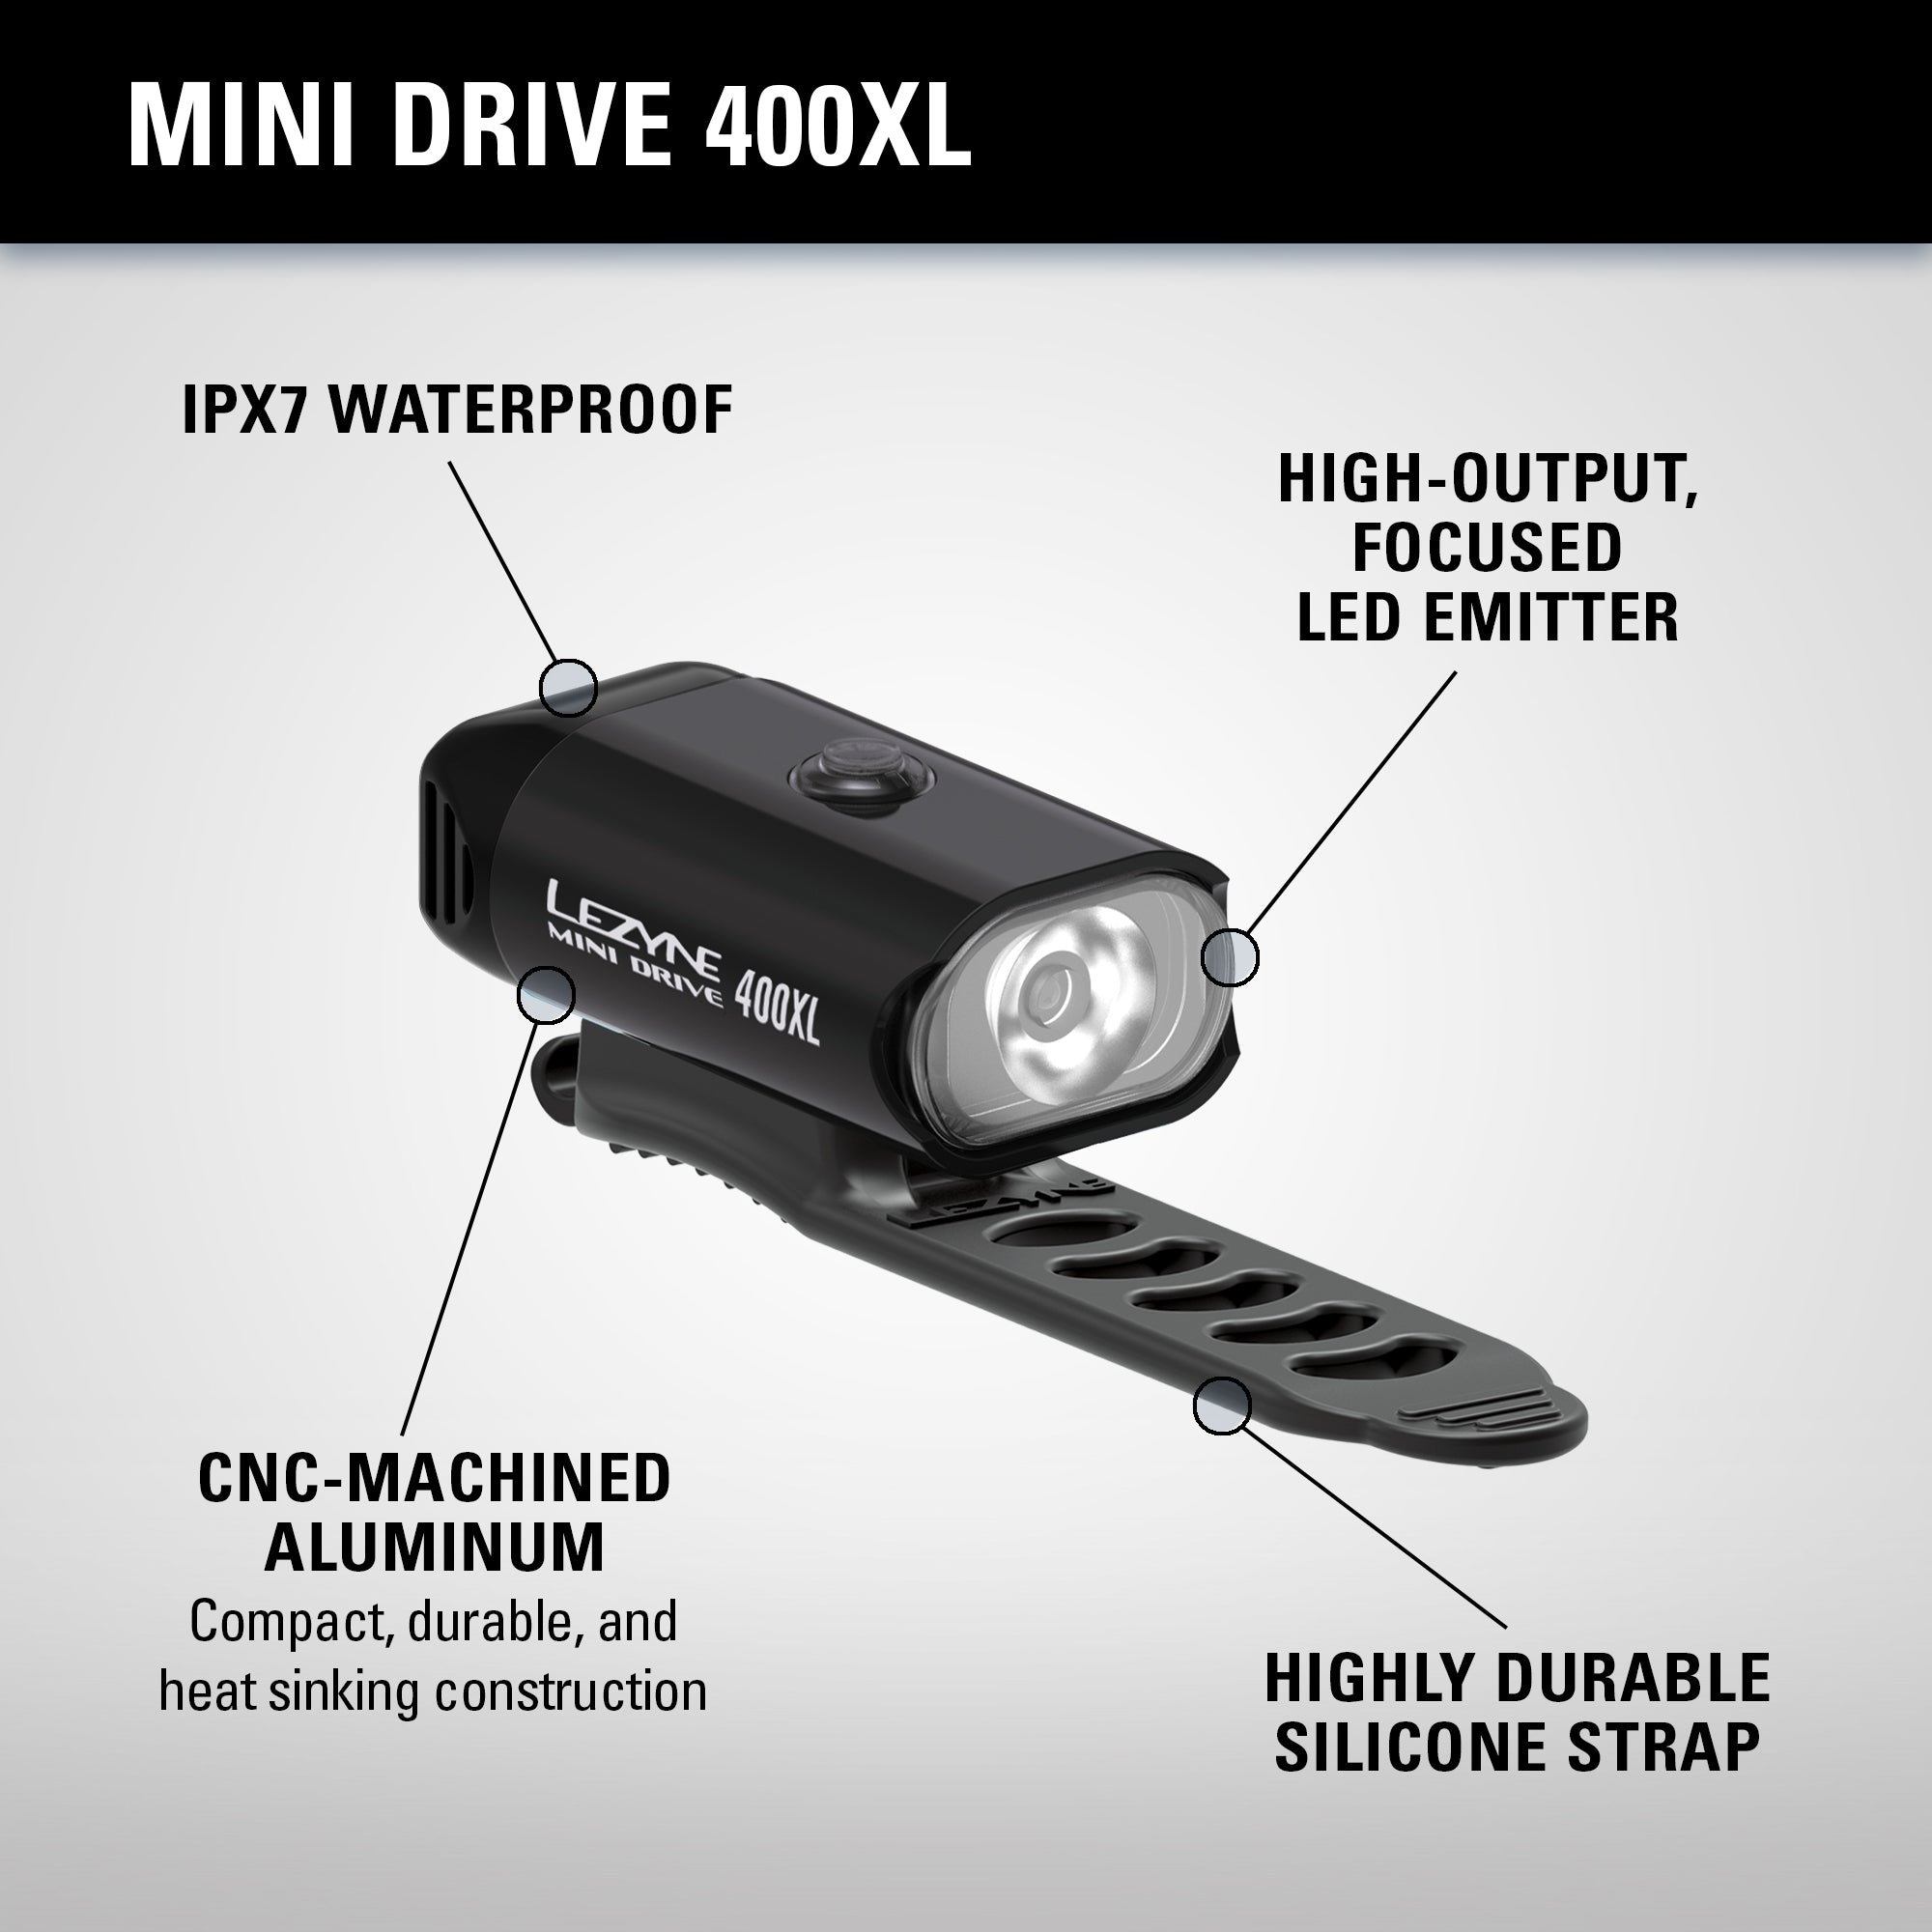 Infographic of Mini Drive 400XL. IPX7 Waterproof. High-output, focused LED emitter. CNC-machined aluminum (compact, durable, and heat sinking construction). Highly durable silicone strap. 